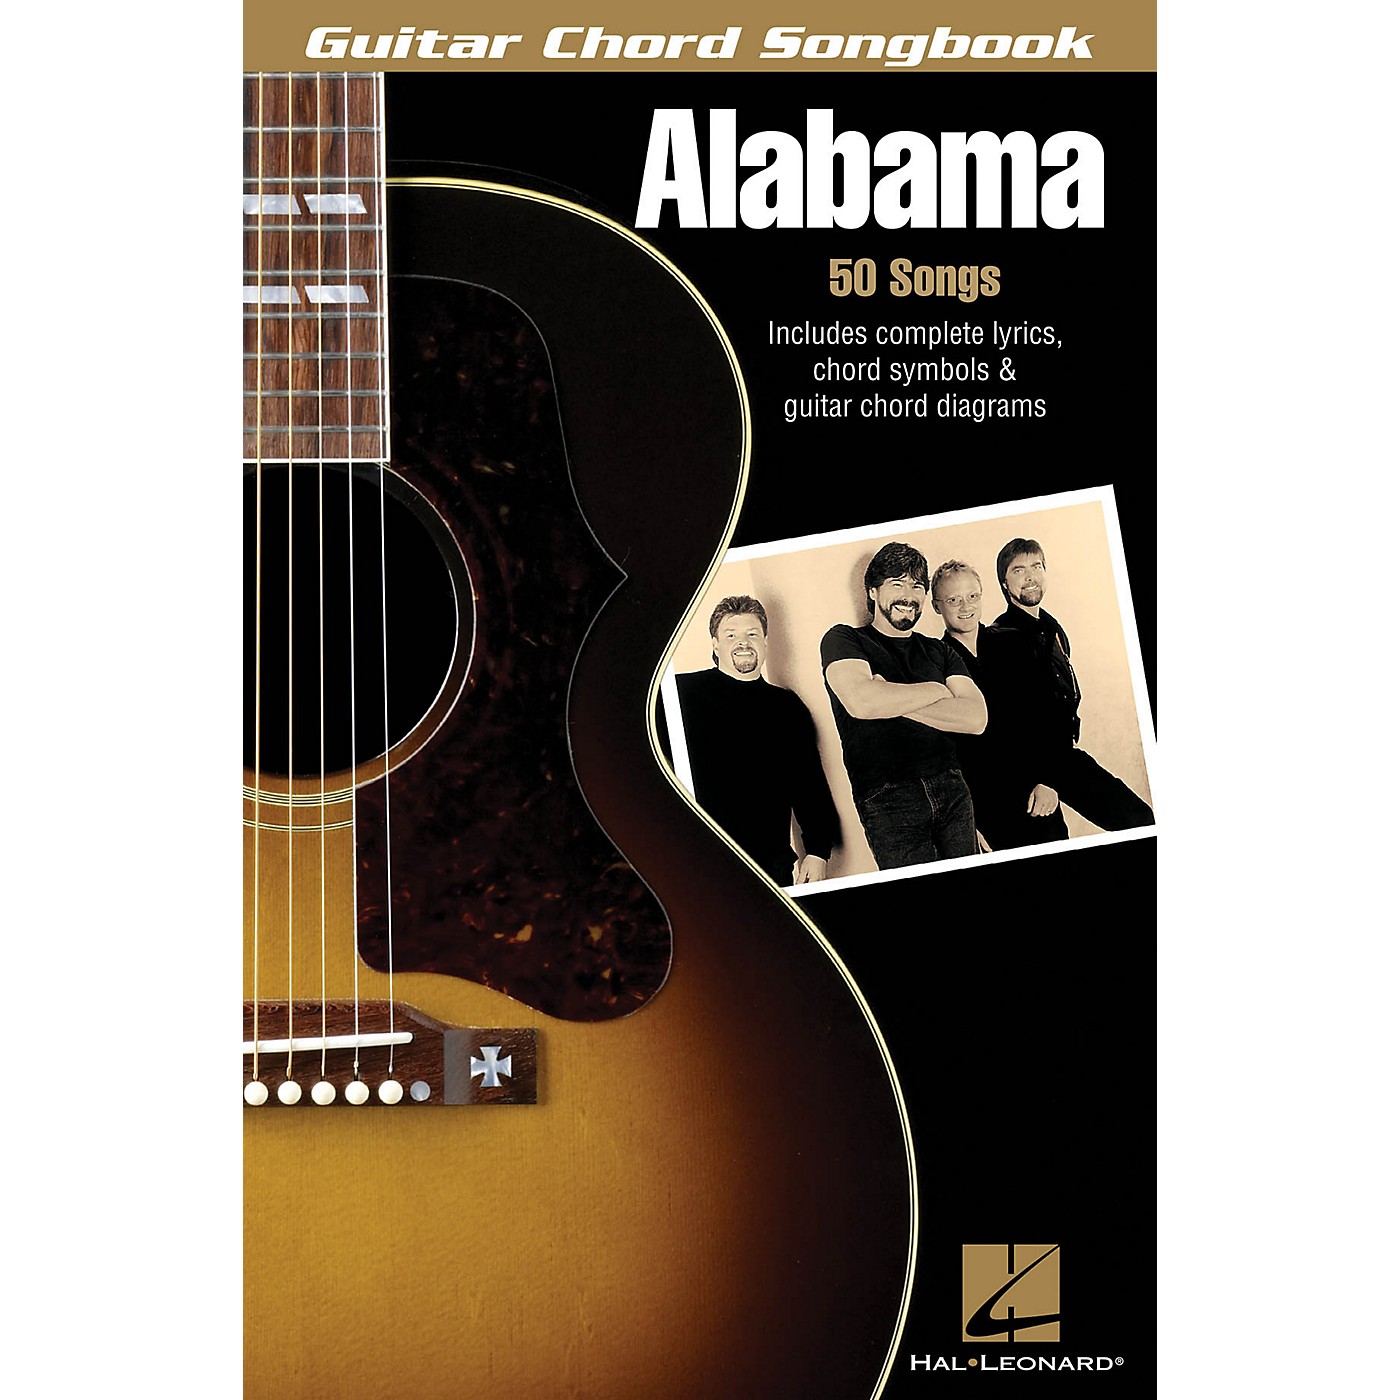 Hal Leonard Alabama Guitar Chord Songbook Series Softcover Performed by Alabama thumbnail